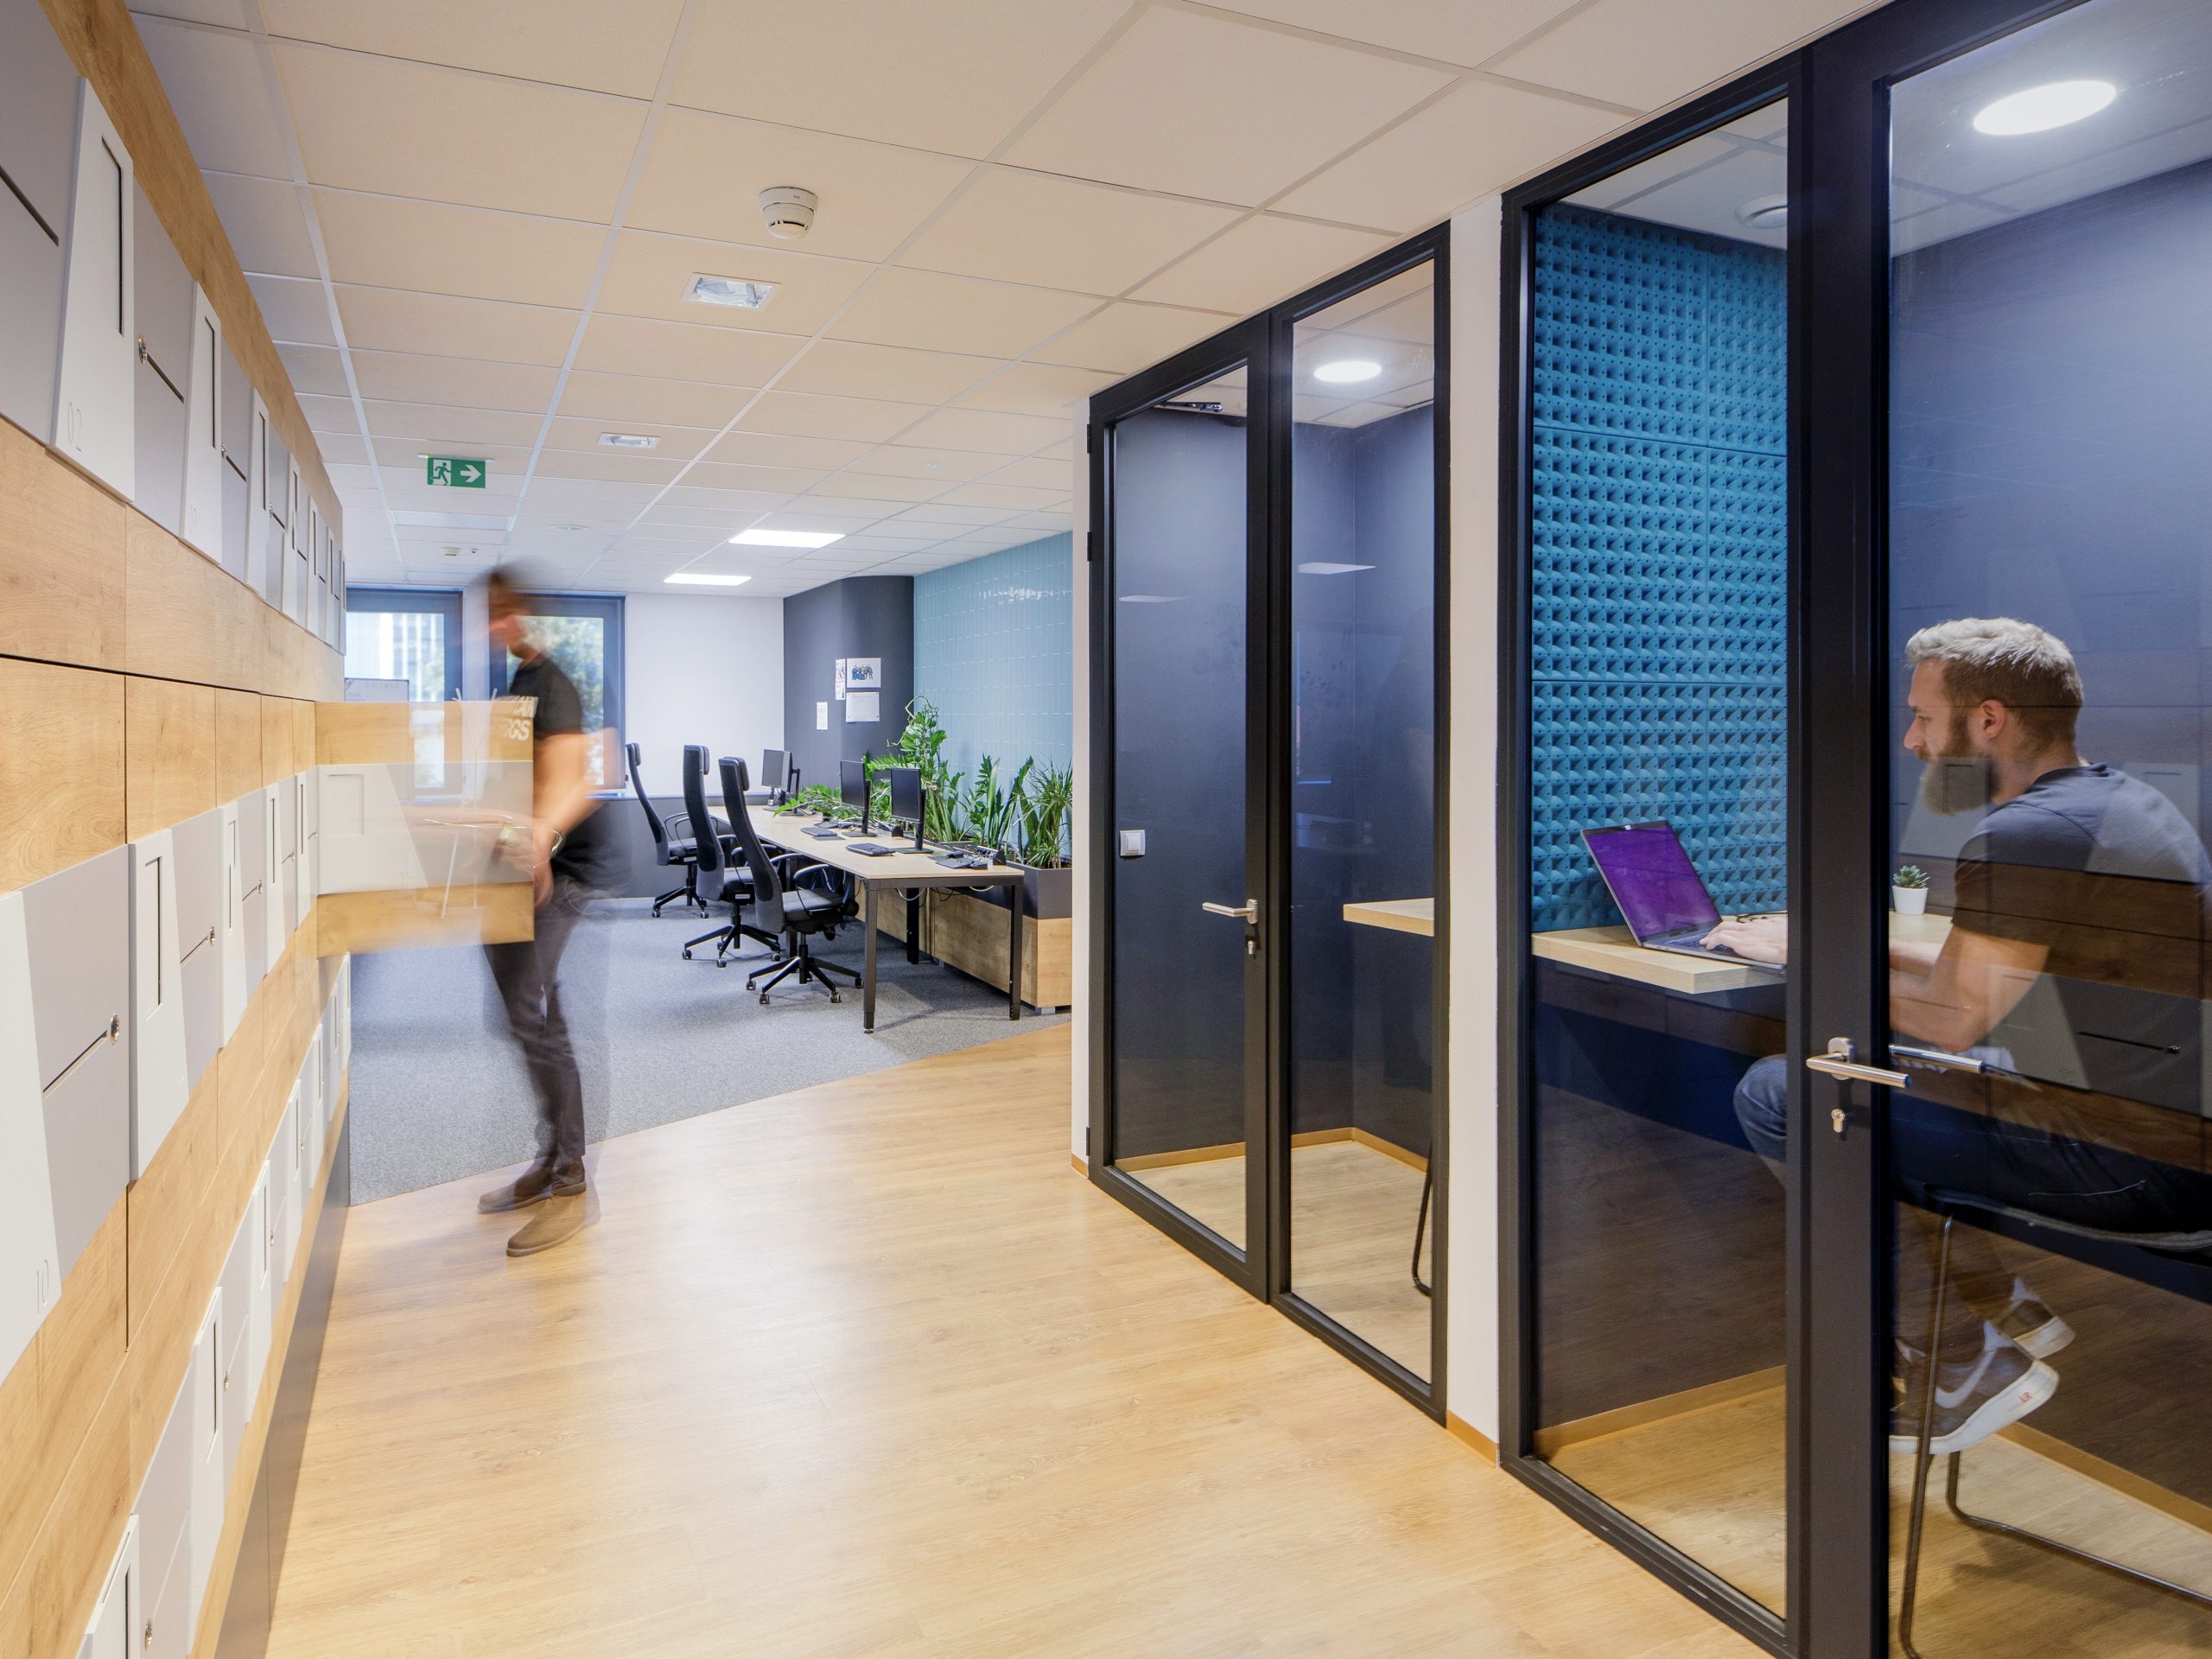 Open office space with wooden floors and an ajoining blue office behind a glass wall.